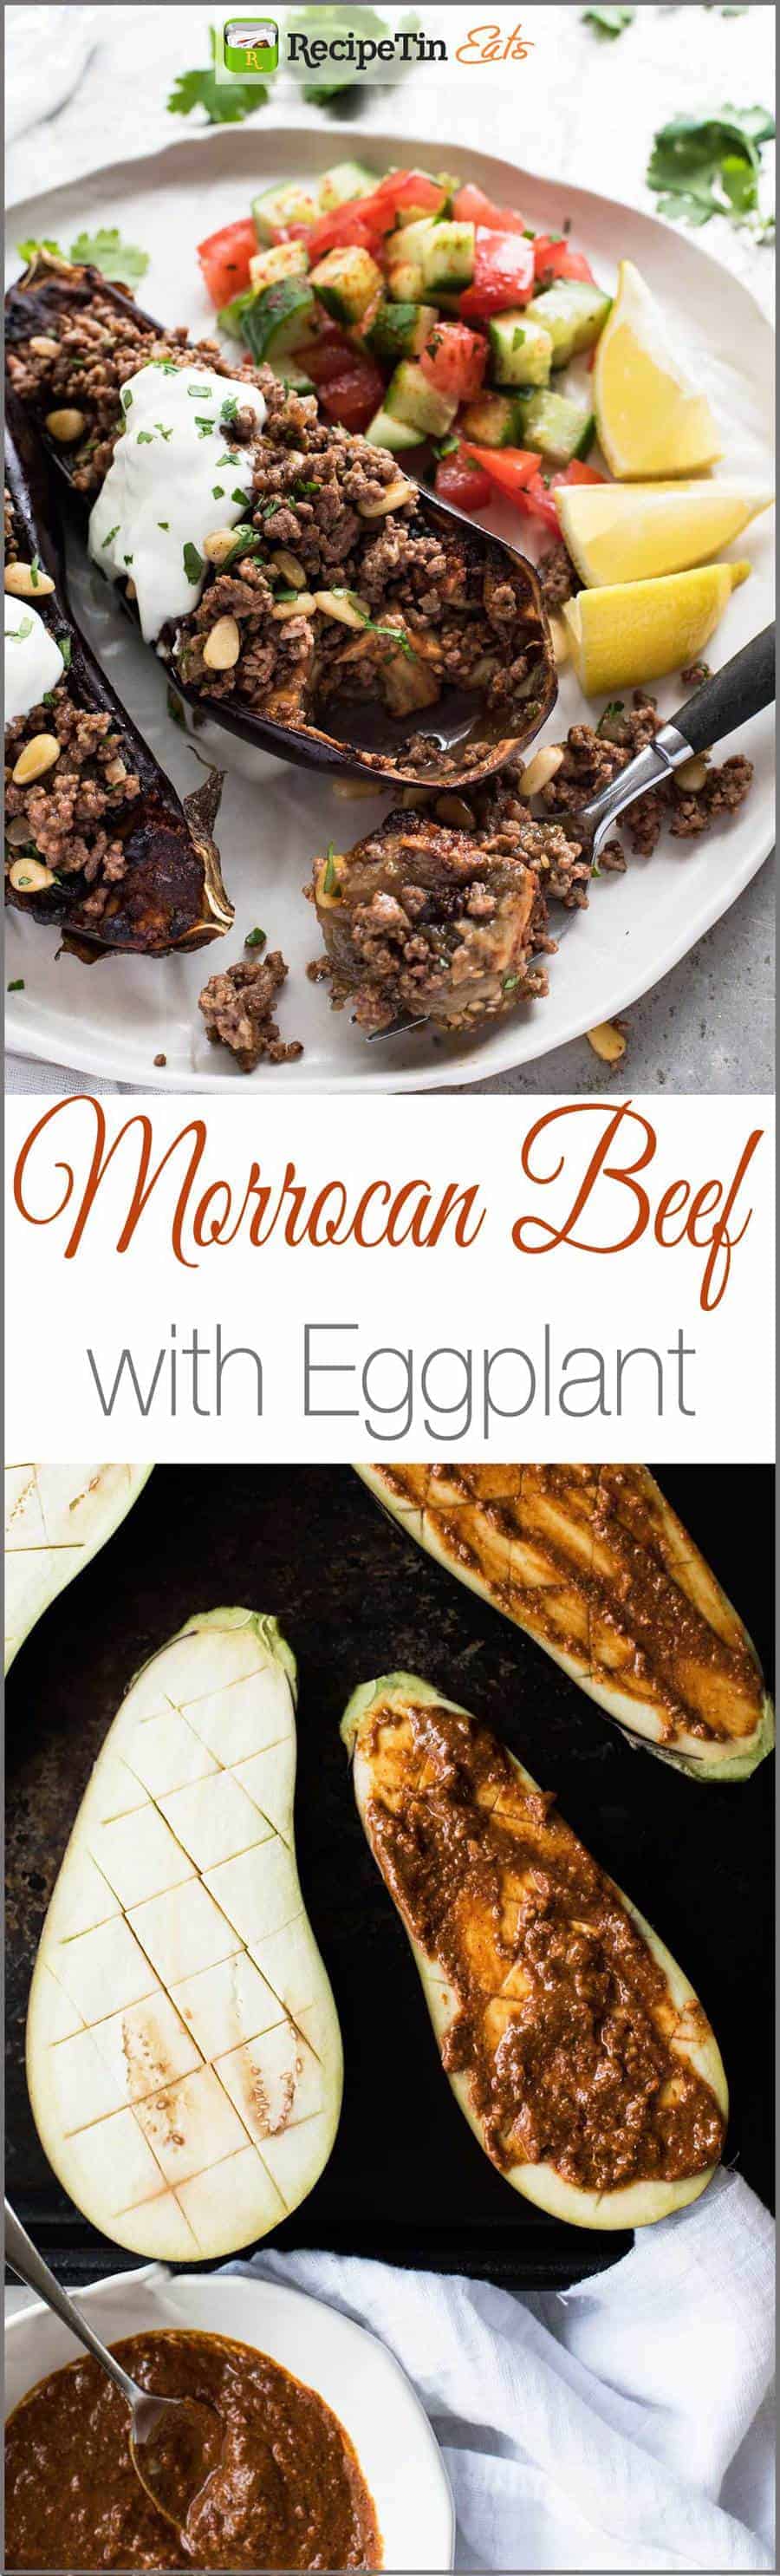 Moroccan Baked Eggplant with Beef - A simple but amazing spice mix forms the base of this incredible meal that happens to only be 460 calories a serving.